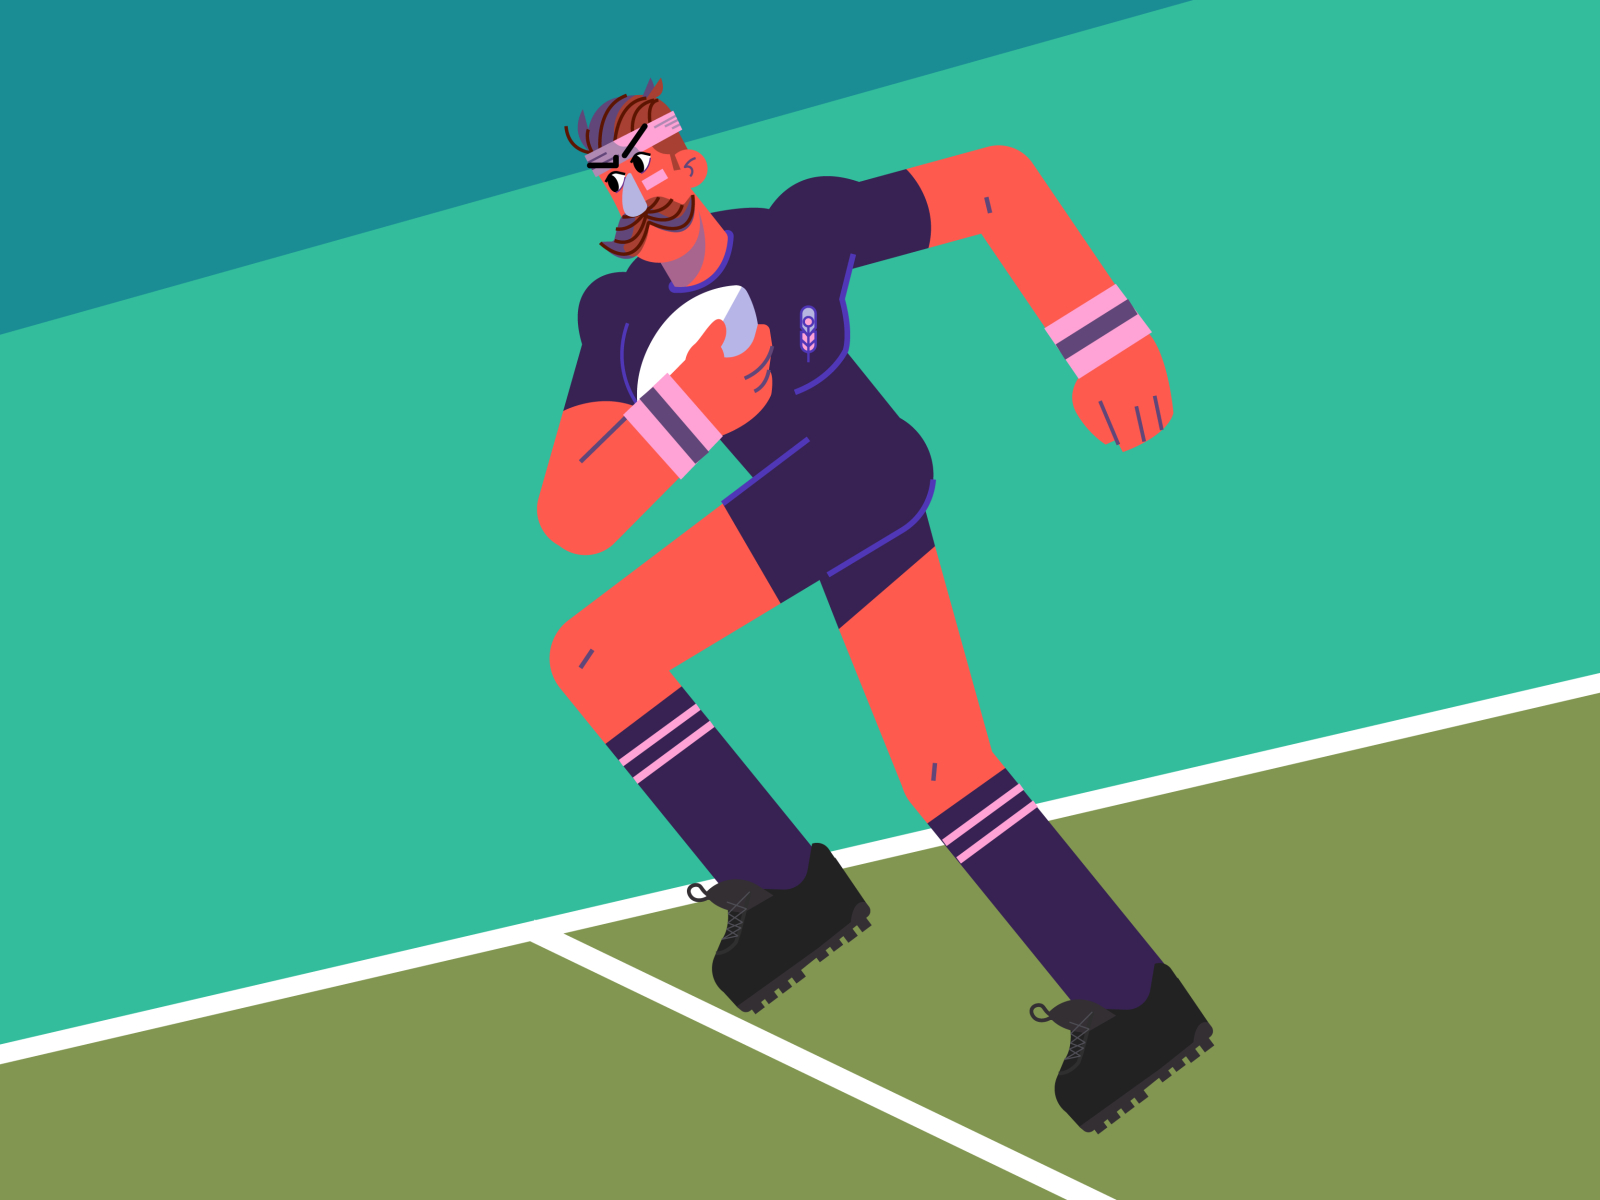 Rugby ???? new zealand editorial illustration editorial design cartoon strong guy running sports sport rugby graphics character design modern ilustracion flat graphic design vector illustration